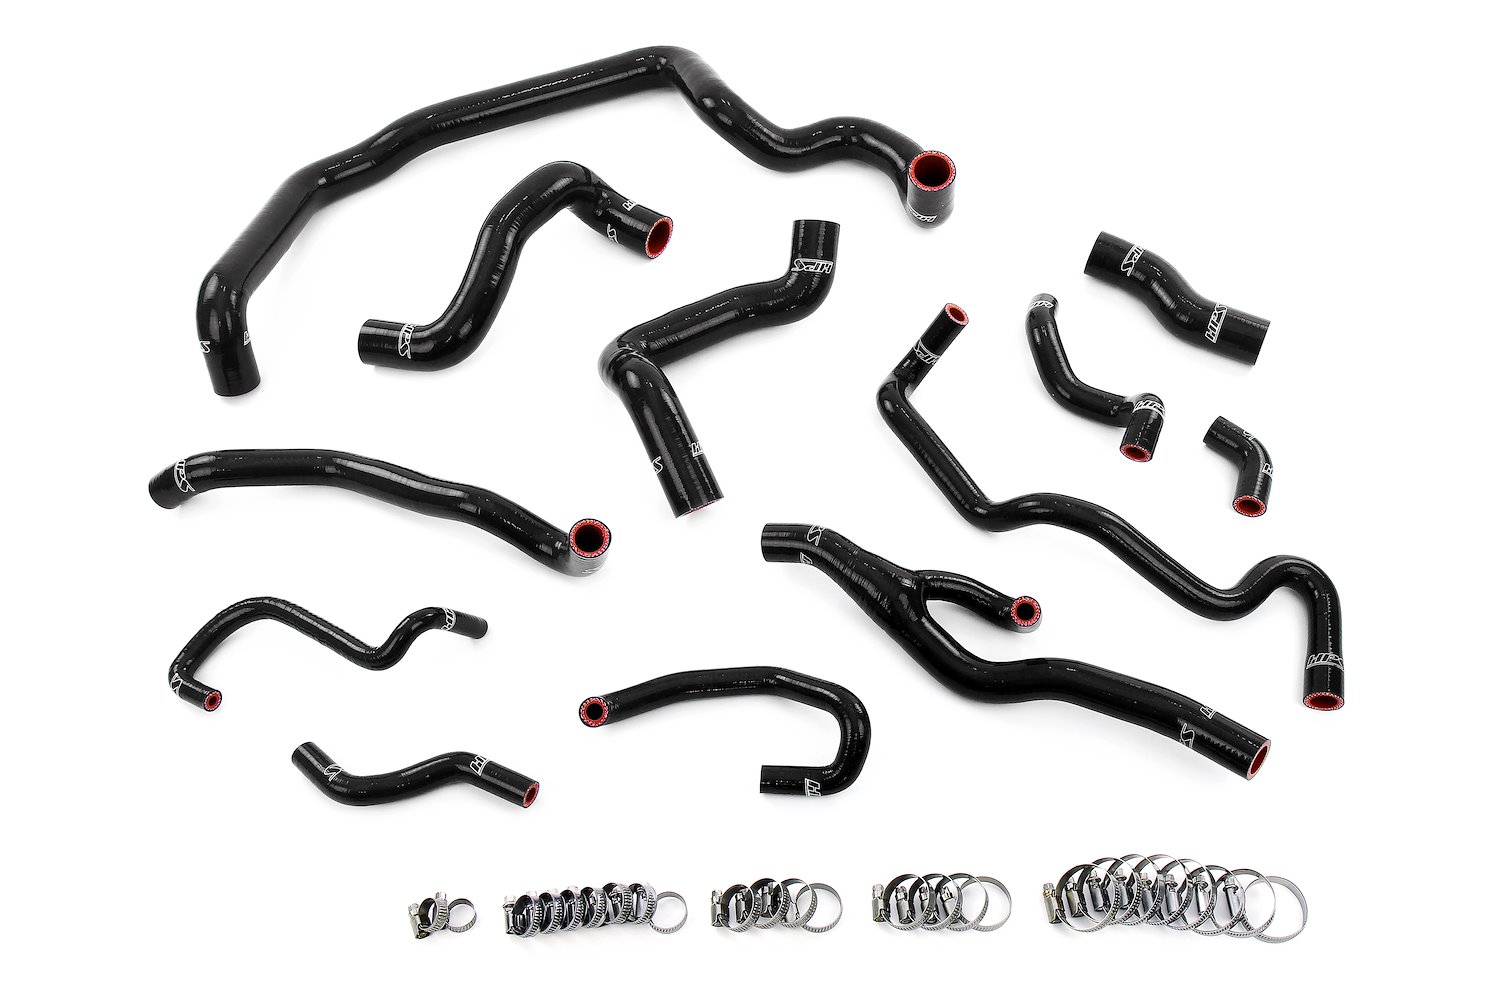 57-2000-BLK Coolant Hose Kit, 3-Ply Reinforced Silicone Hoses, For Radiator, Heater, Water Pump, Expansion Tank